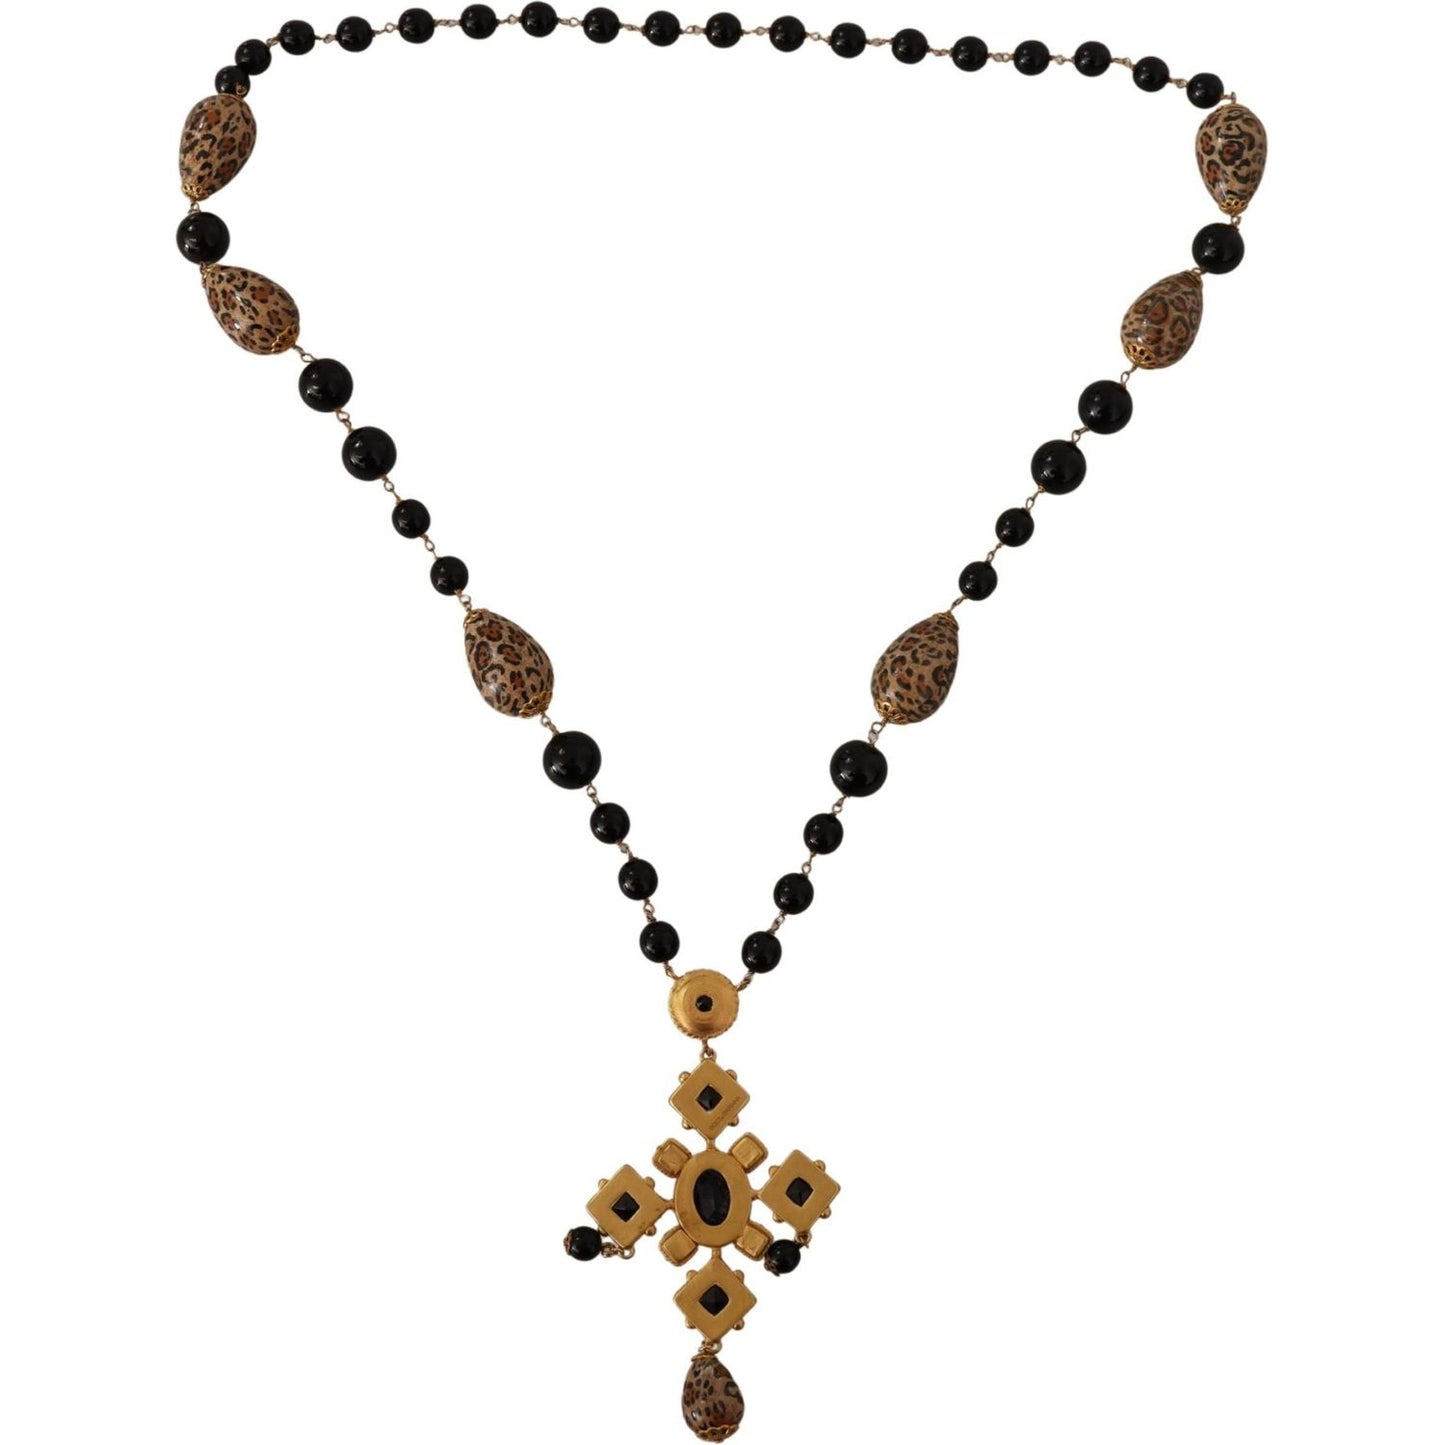 Dolce & Gabbana Elegant Charm Cross Necklace with Crystal Details gold-tone-brass-leopard-cross-chain-black-crystal-necklace